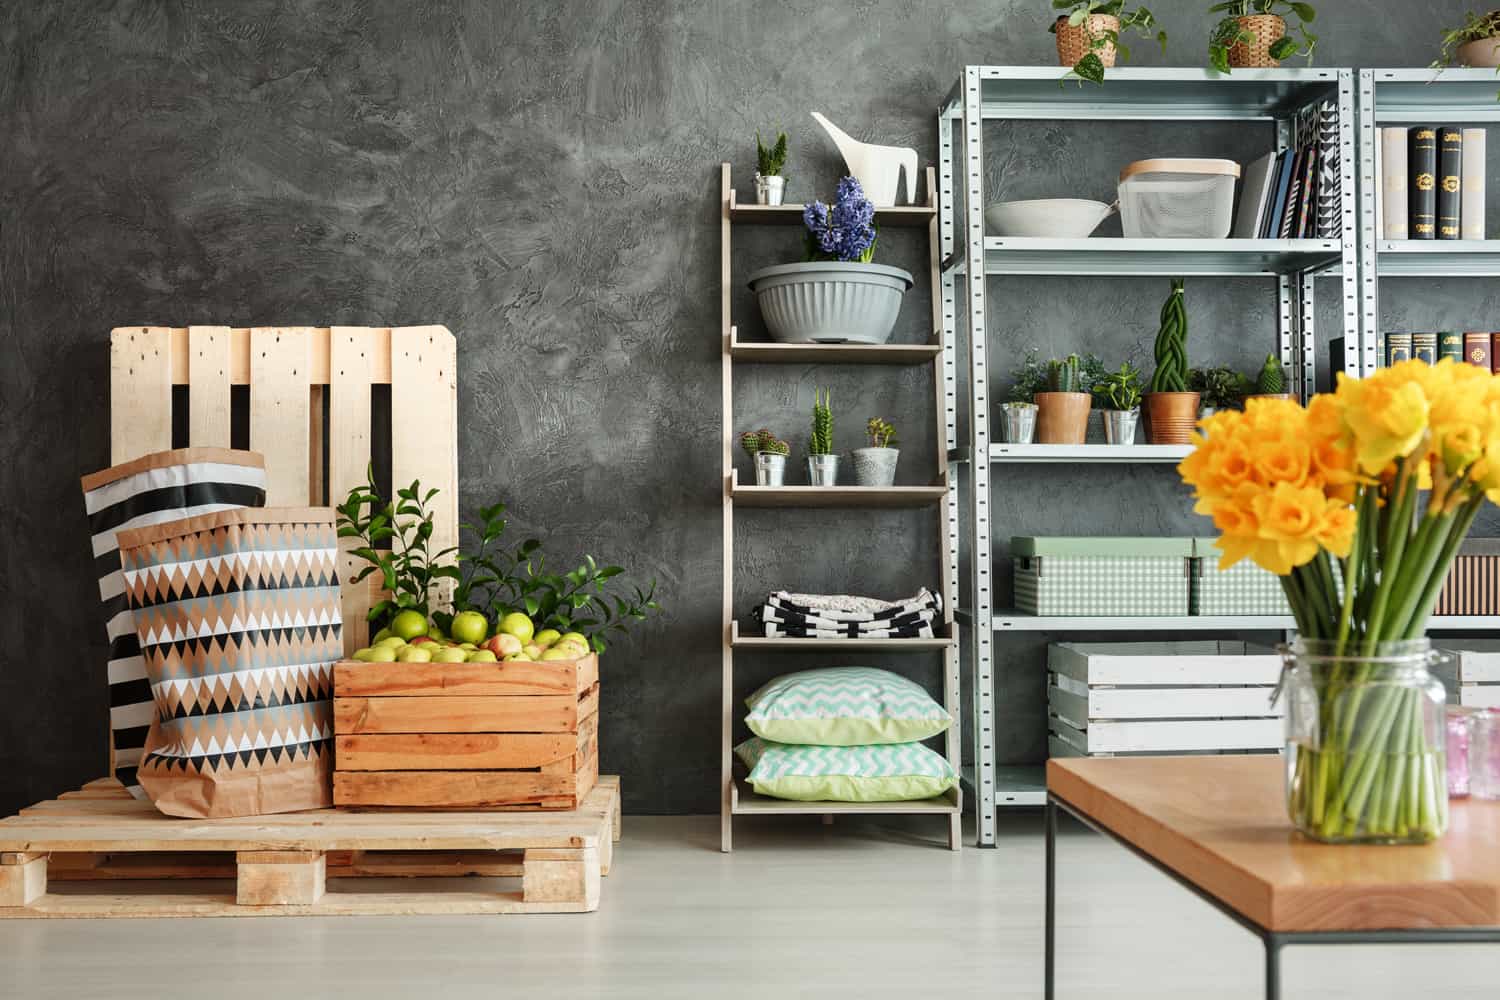 Grey and white room with plants on metal shelves and wooden pallets